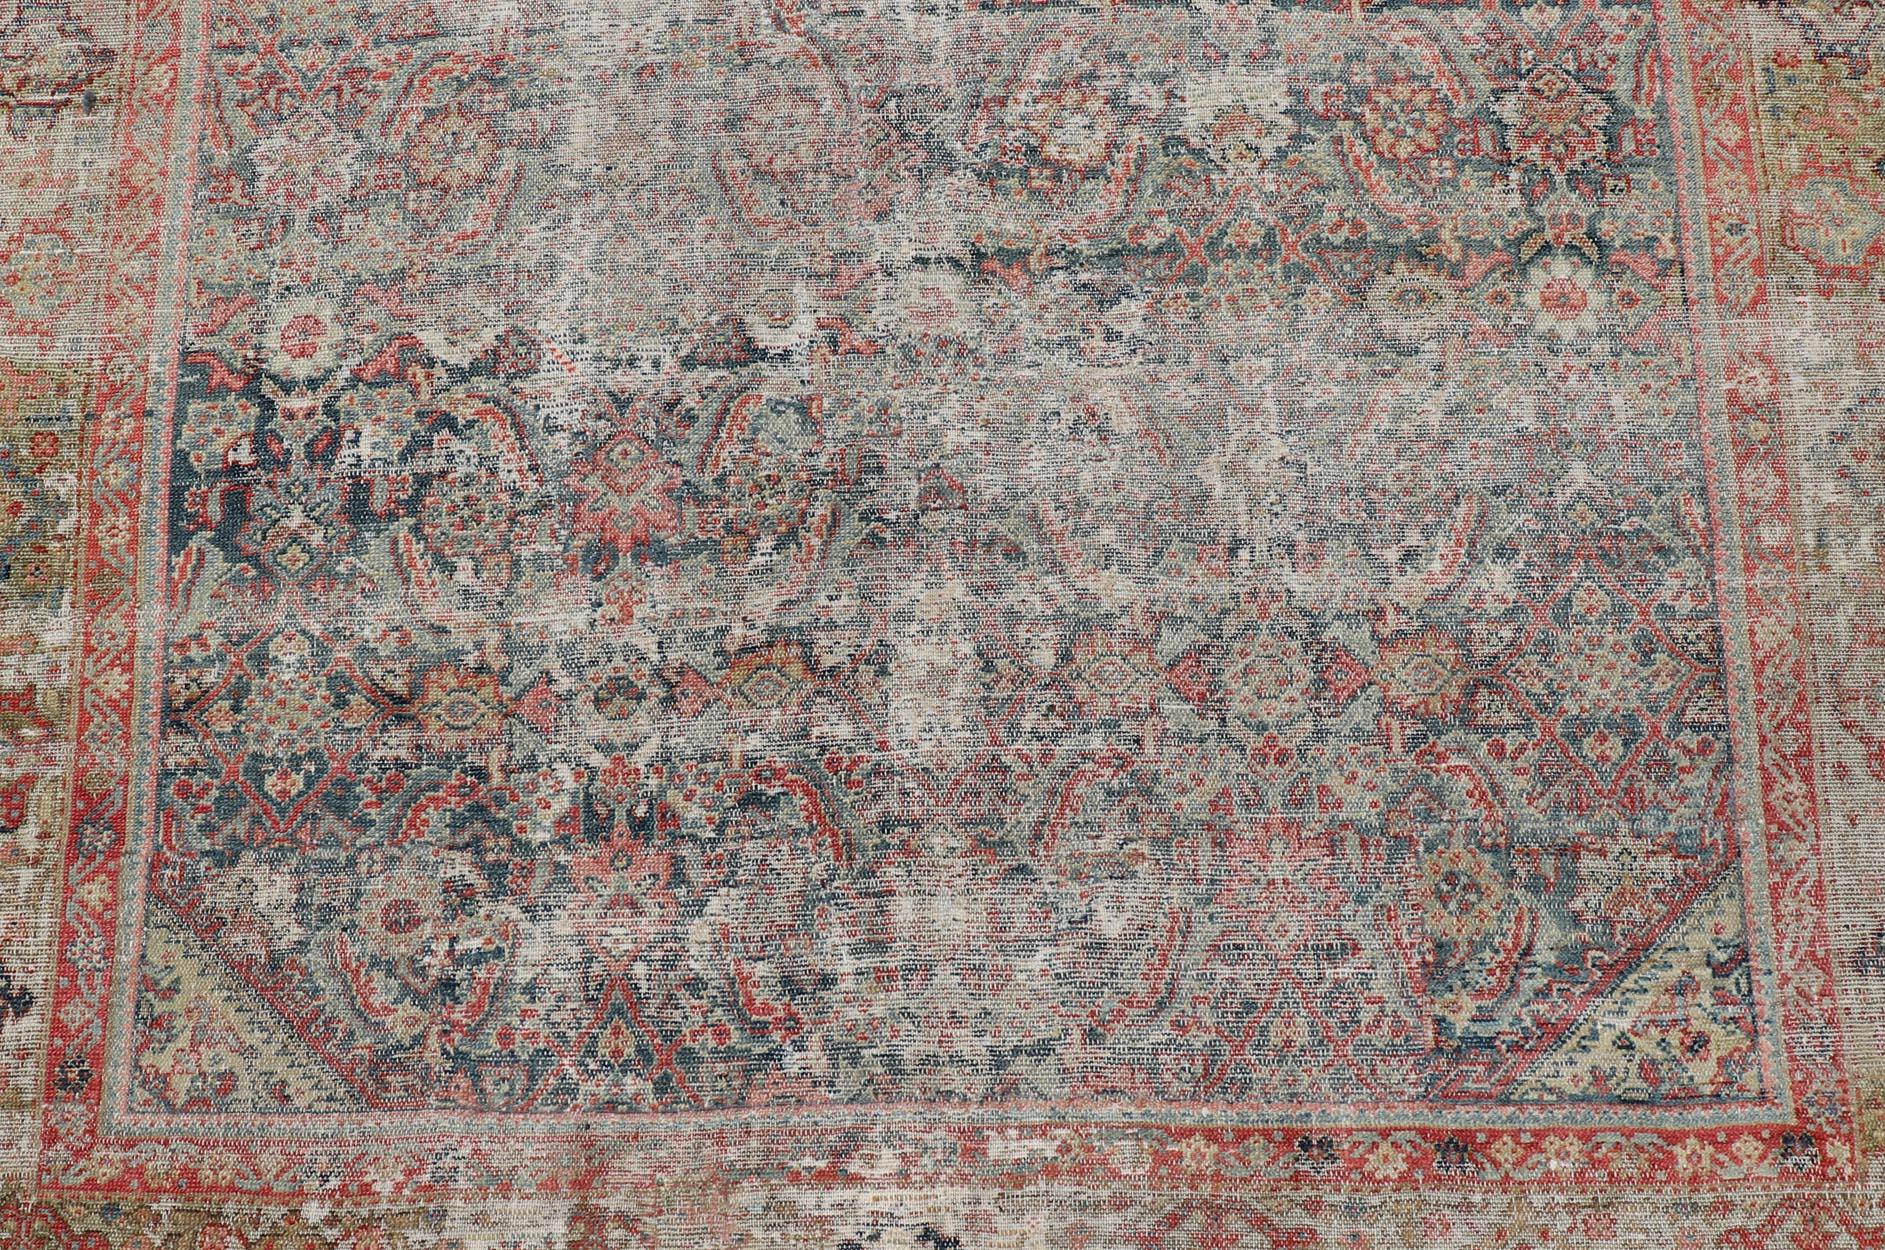 Distressed antique Persian Malayer gallery runner with geometric all-over Herati design. Keivan Woven Arts / rug/ R20-63, country of origin / type: Iran / Malayer, circa 1900.

Measures: 5'8 x 14'8

This distressed antique Malayer gallery runner